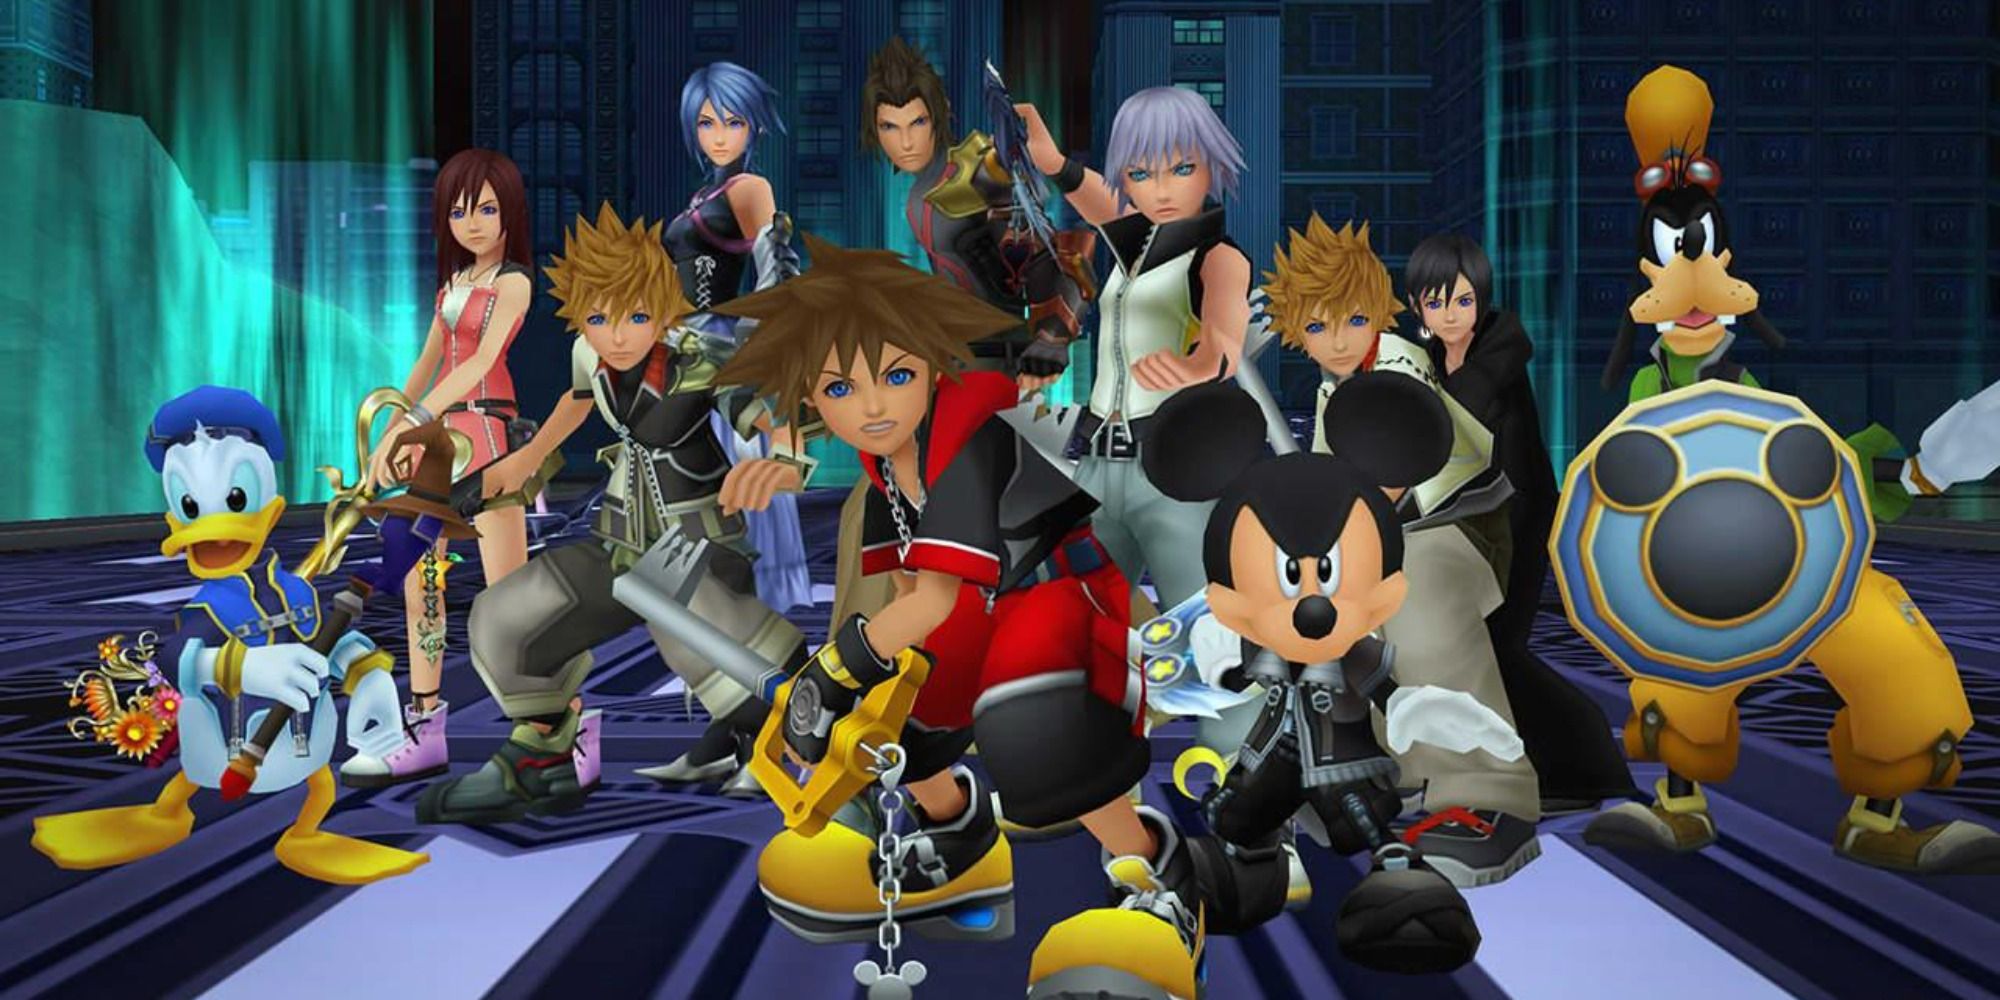 Photo of all the main characters in Kingdom Hearts.